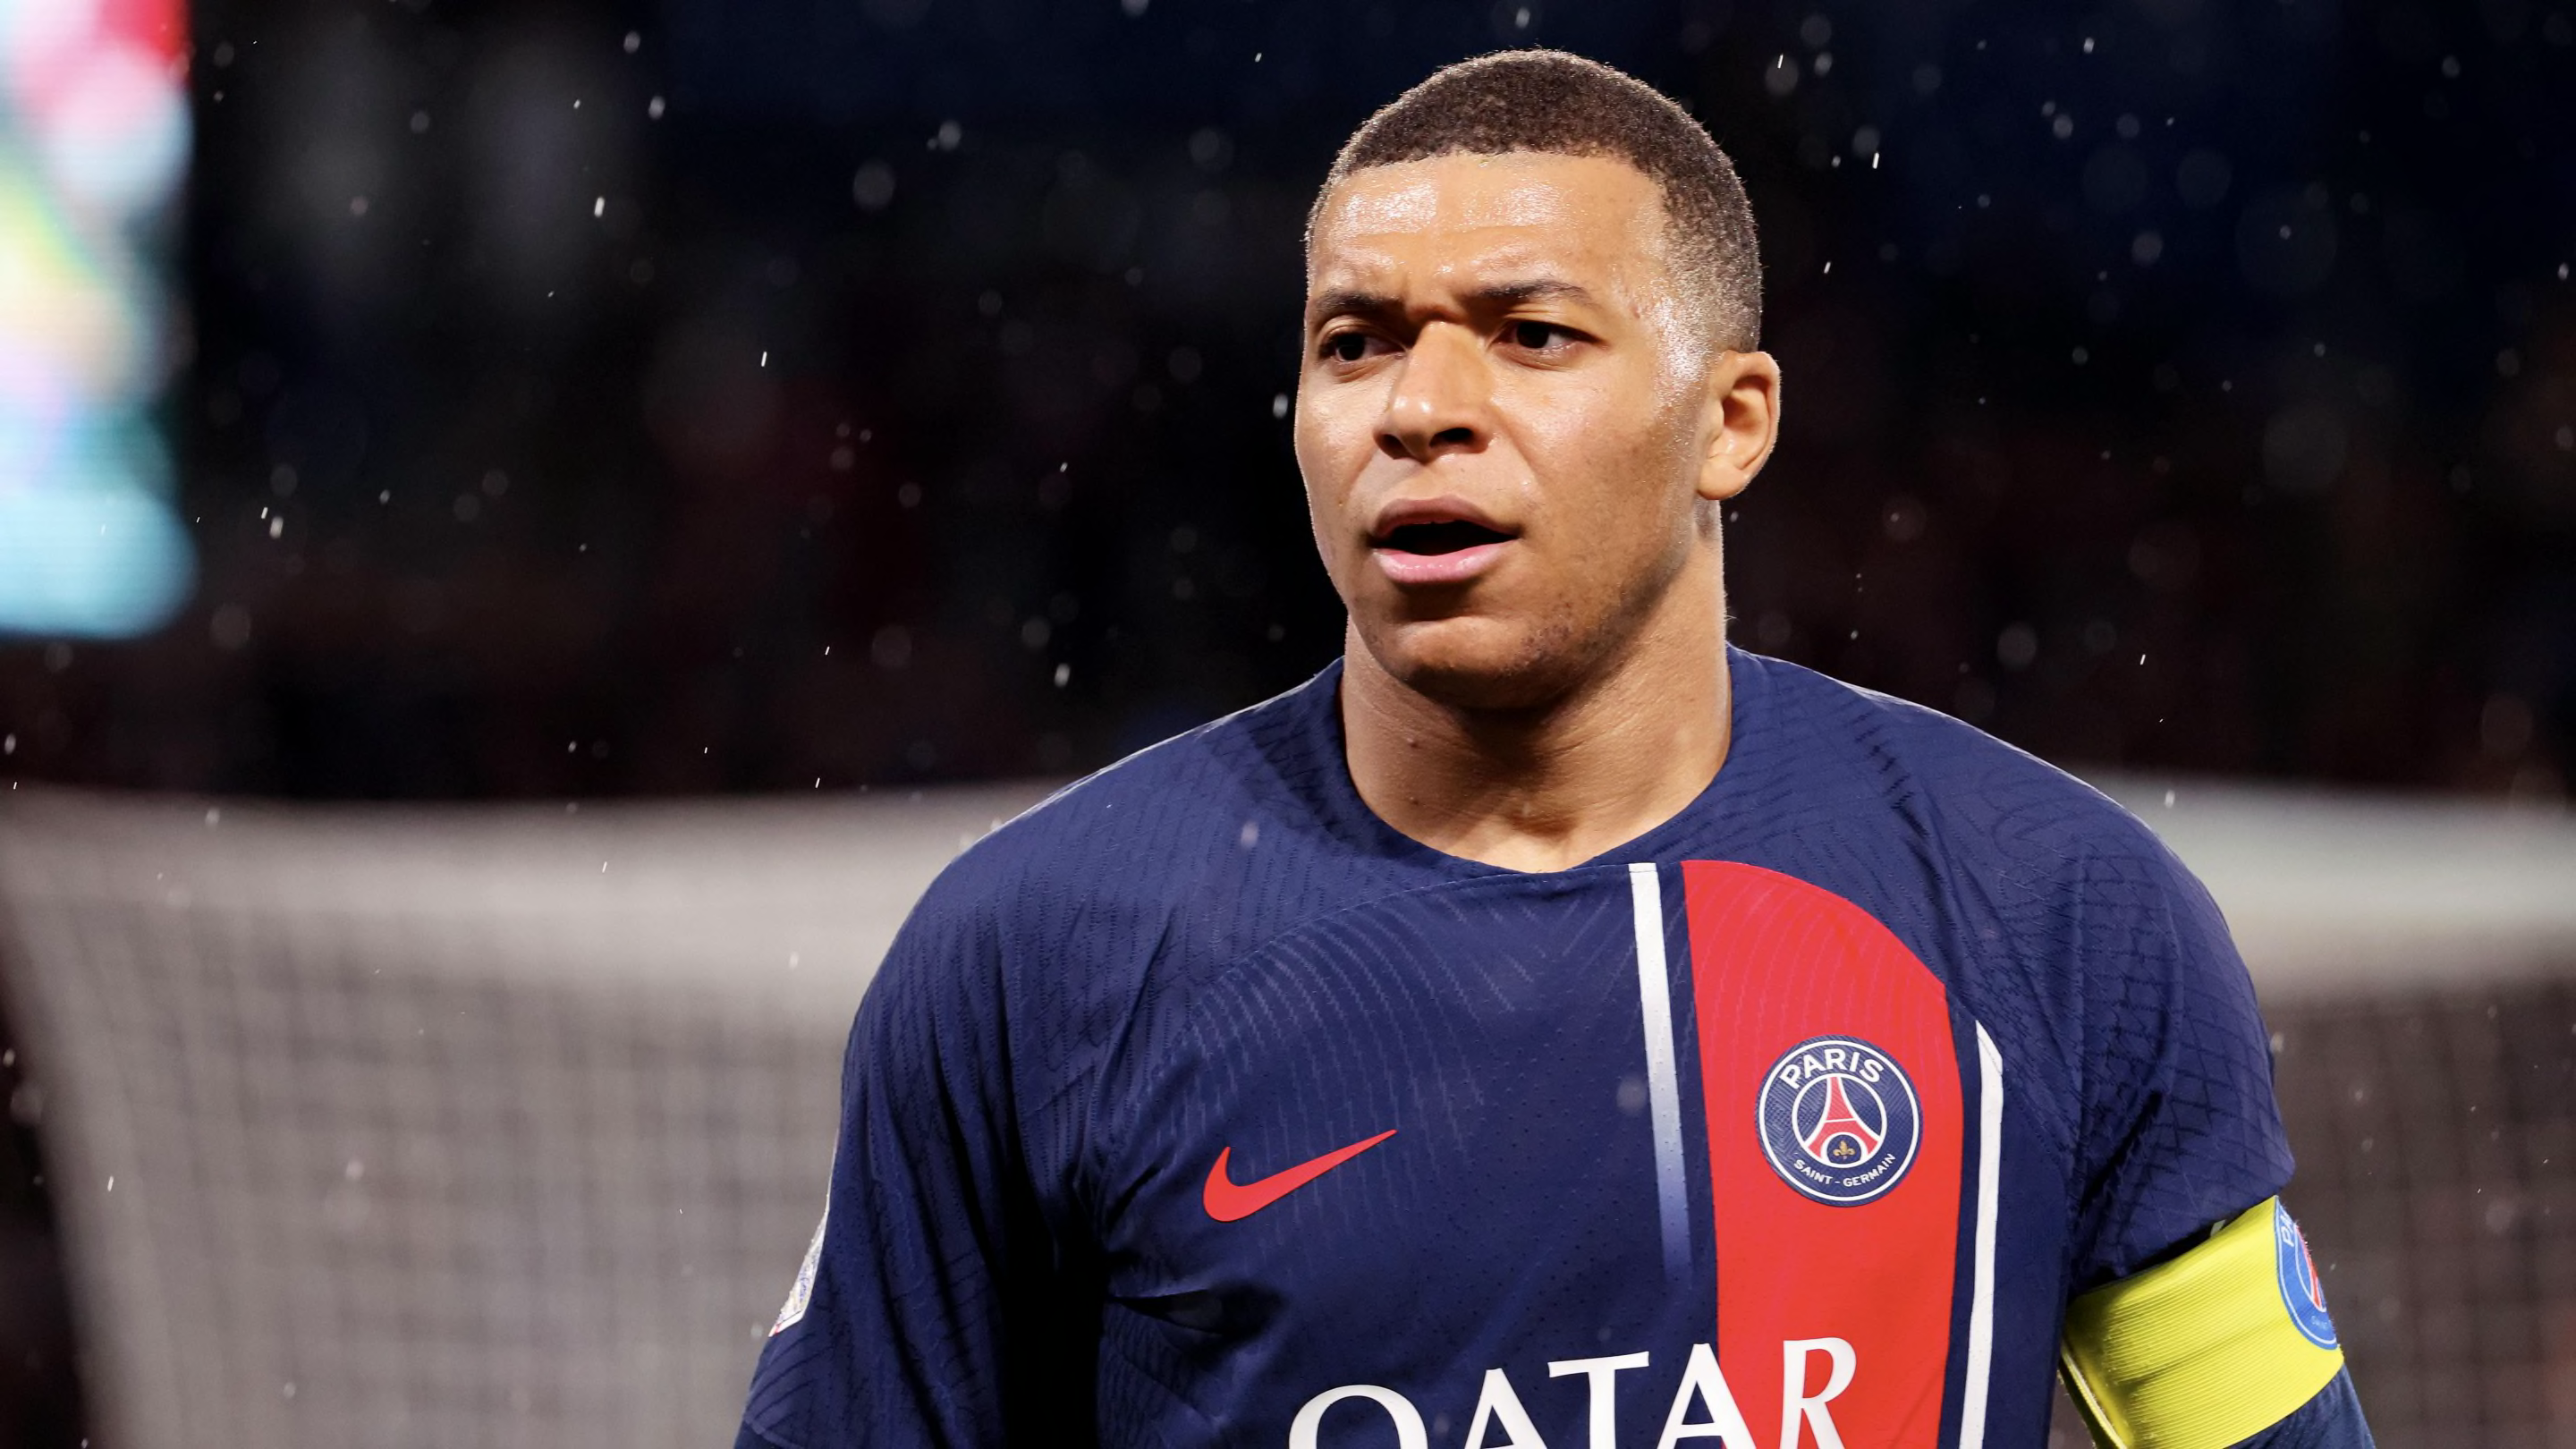 Kylian Mbappe speaks for first time as Real Madrid player